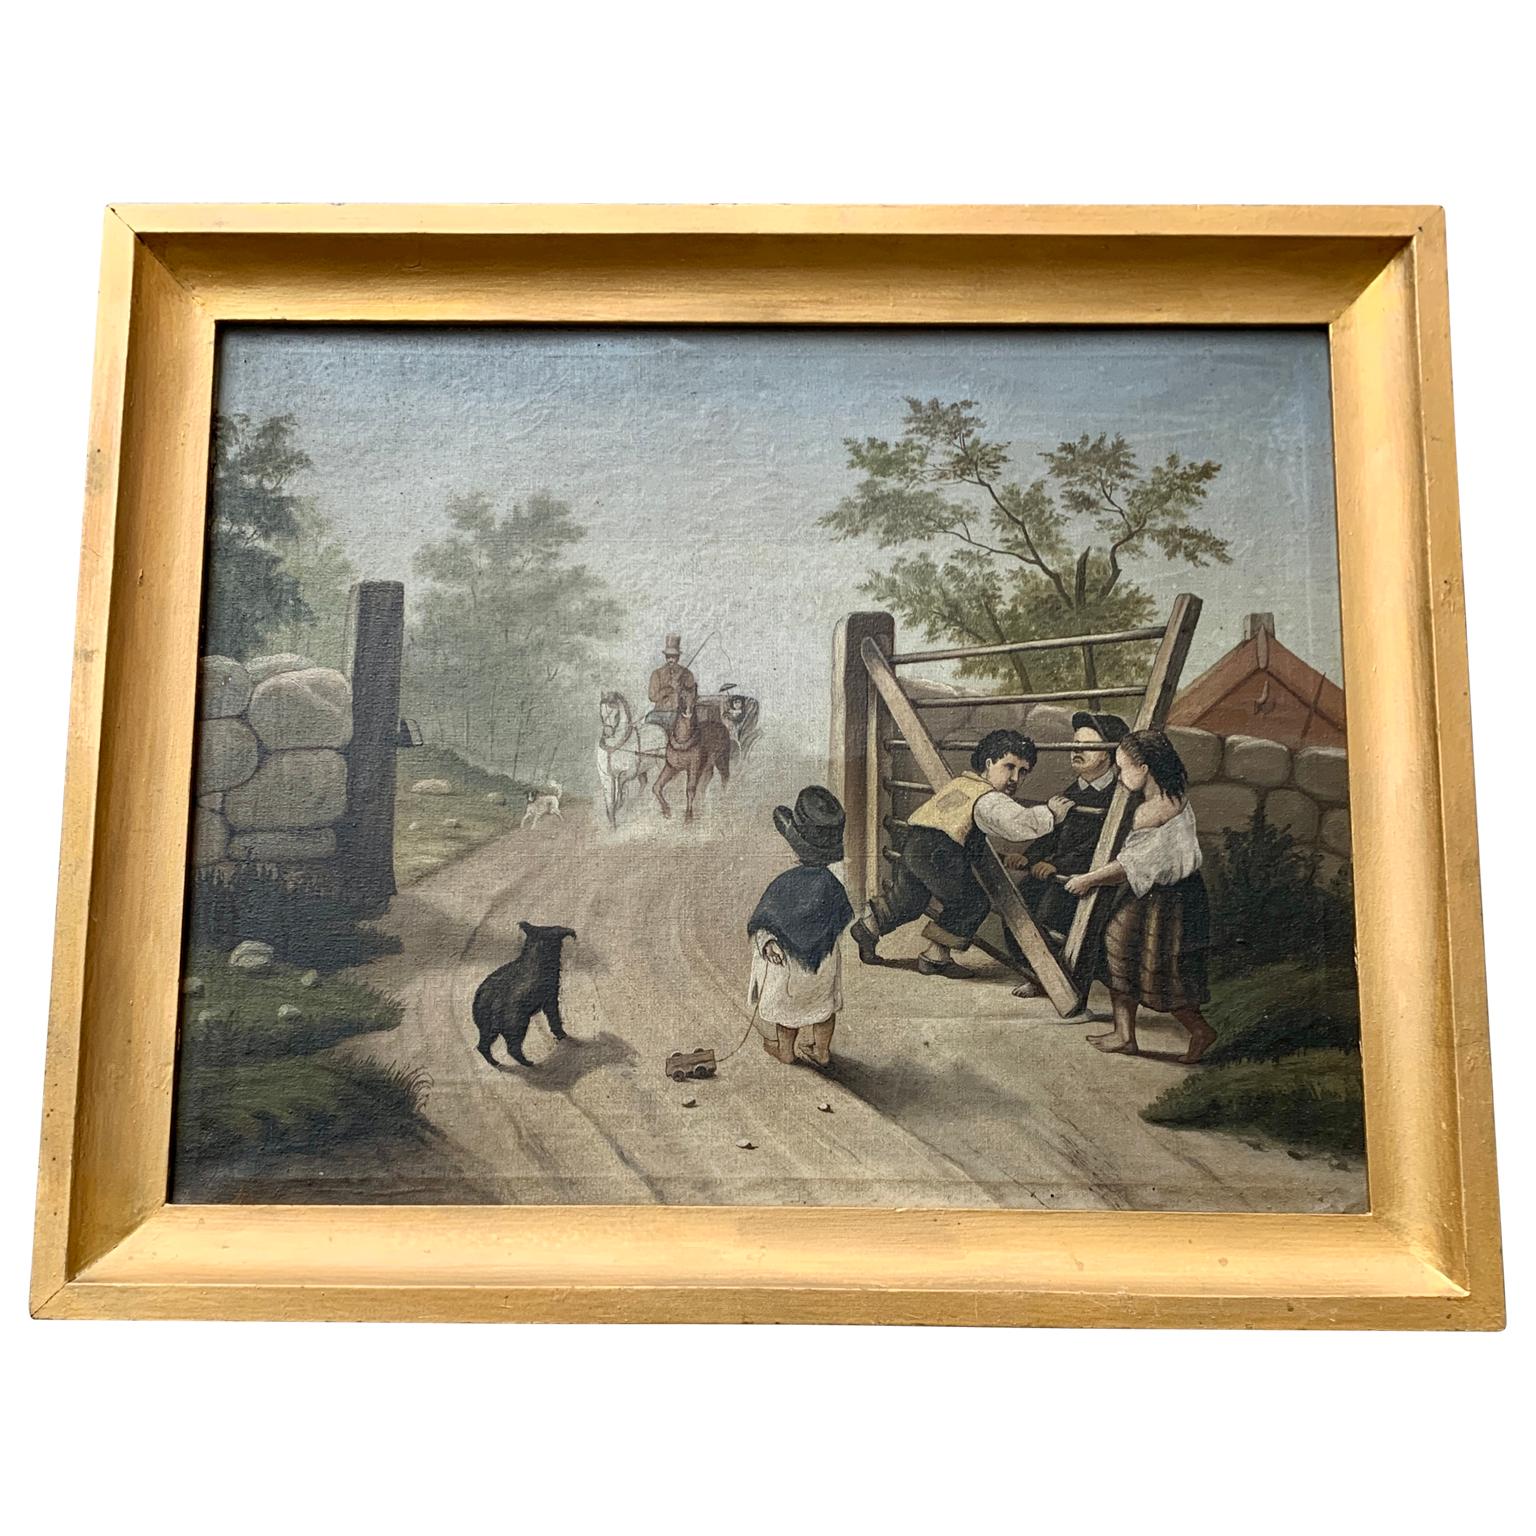 Swedish naive oil painting with the original frame, from the 2nd part of the 19th Century. 
This folk art work on canvas represents kids and a dog playing by a courtyard, opening the gate for a horse carriage with a lady sitting in it and its driver